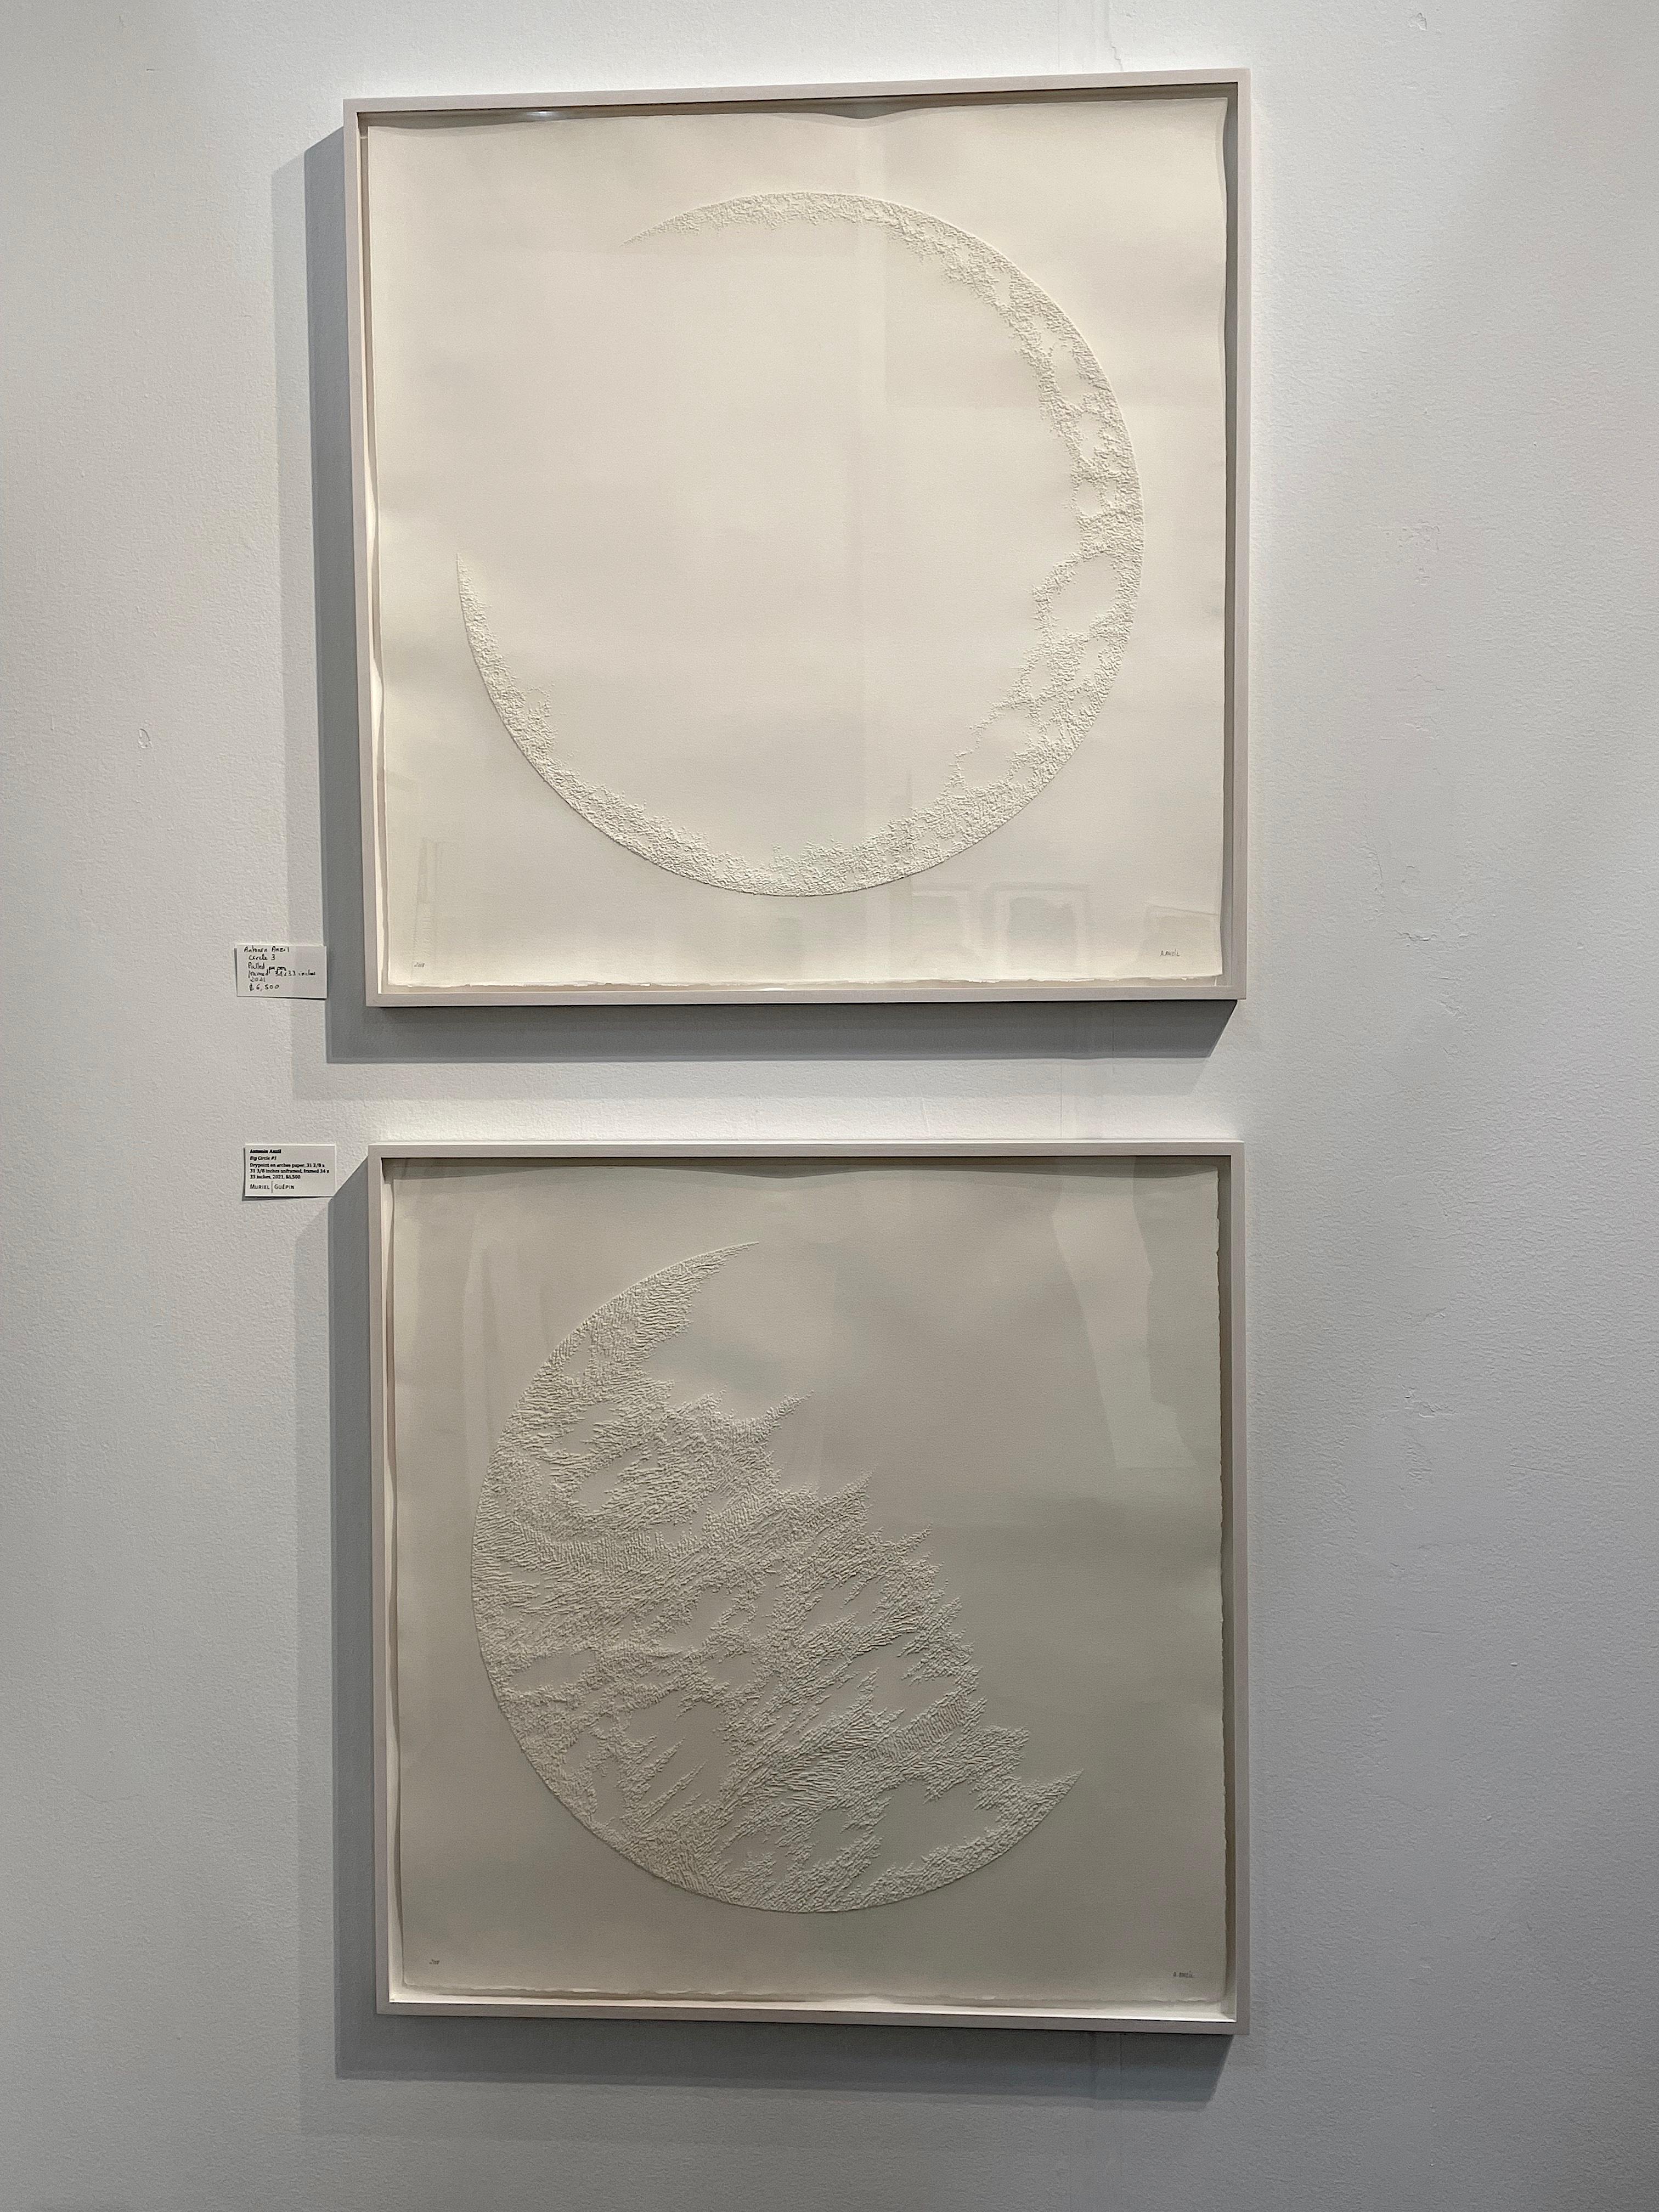 Moon Circle 3 - intricate white 3D abstract geometric pulled paper drawing  - Art by Antonin Anzil